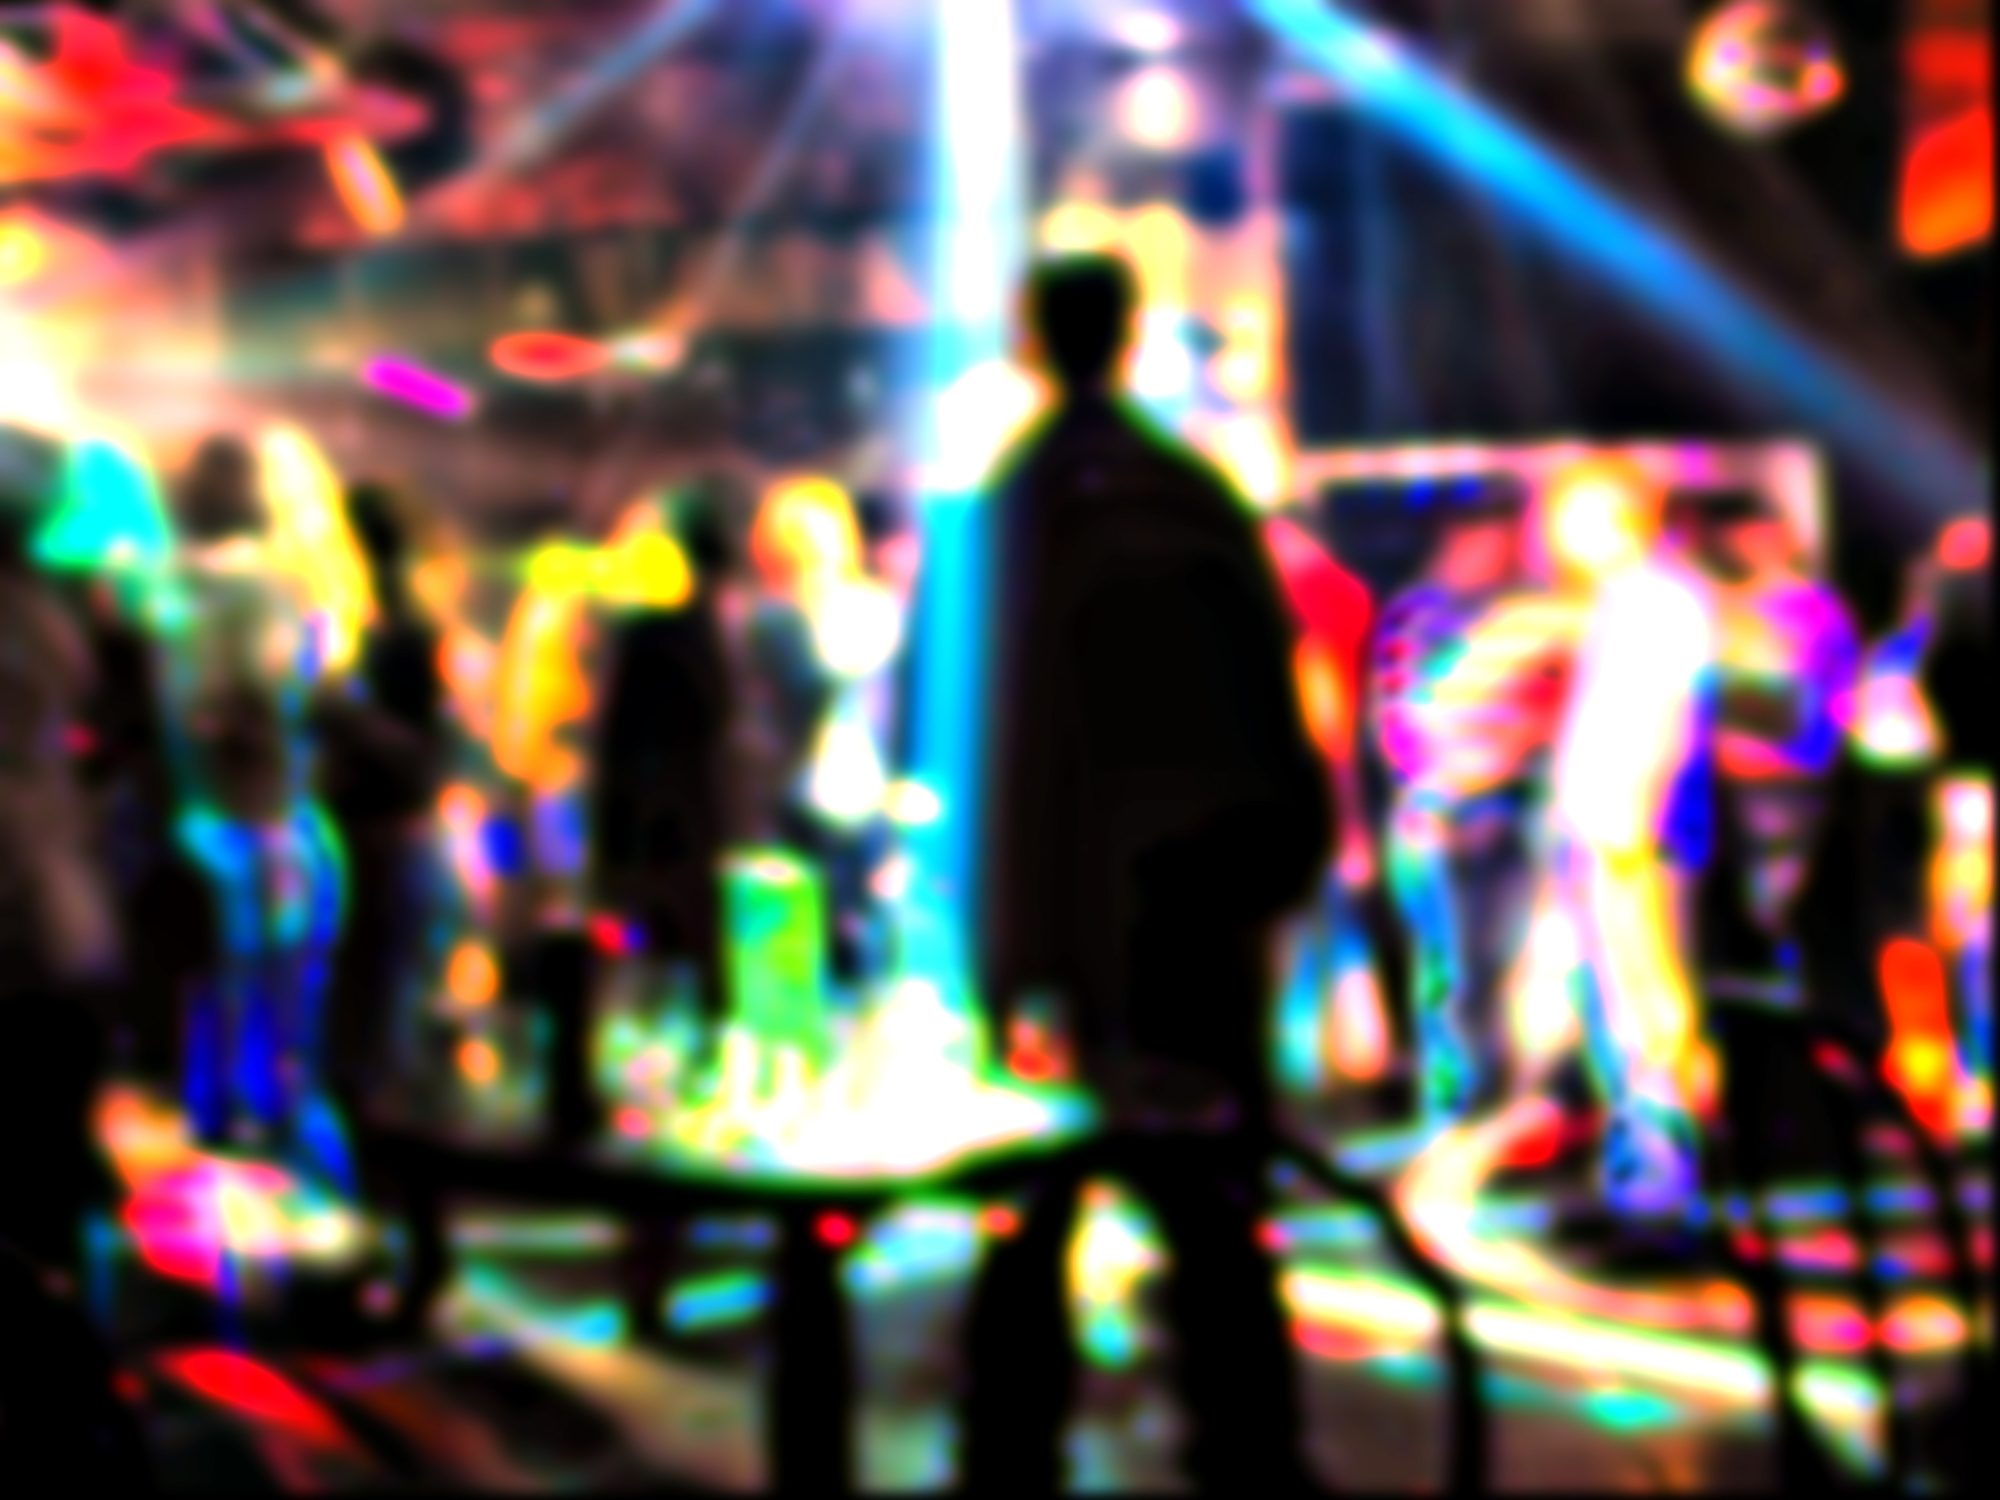 Blurred shot of club demonstrating how a person on a hallucinogenic might see 